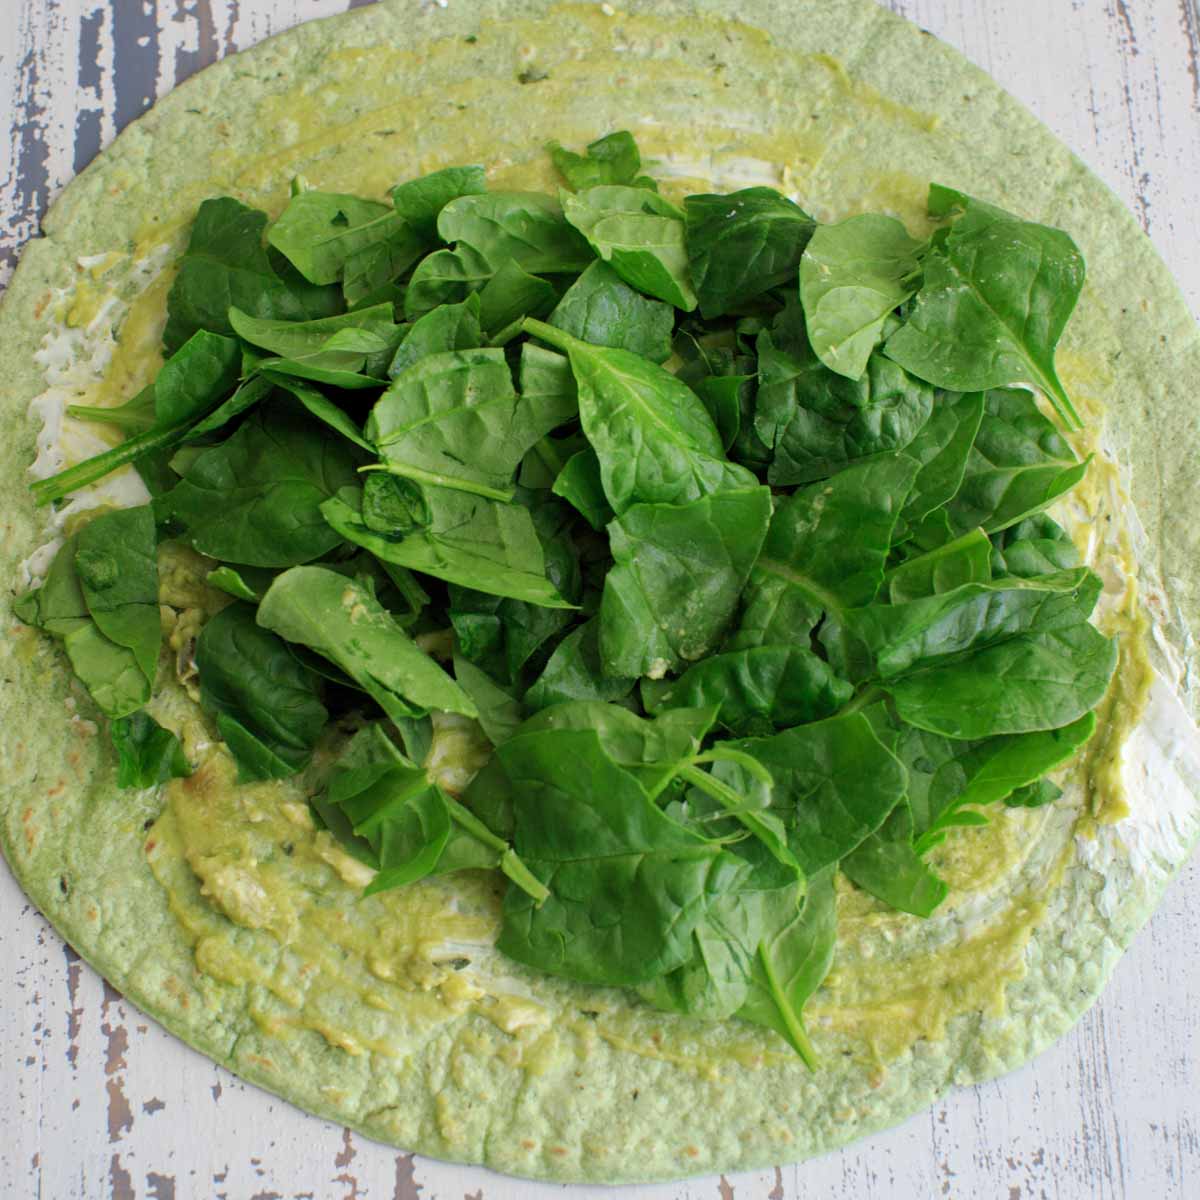 fresh baby spinach added on top of green tortilla that has guacamole and spreadable cream cheese on top